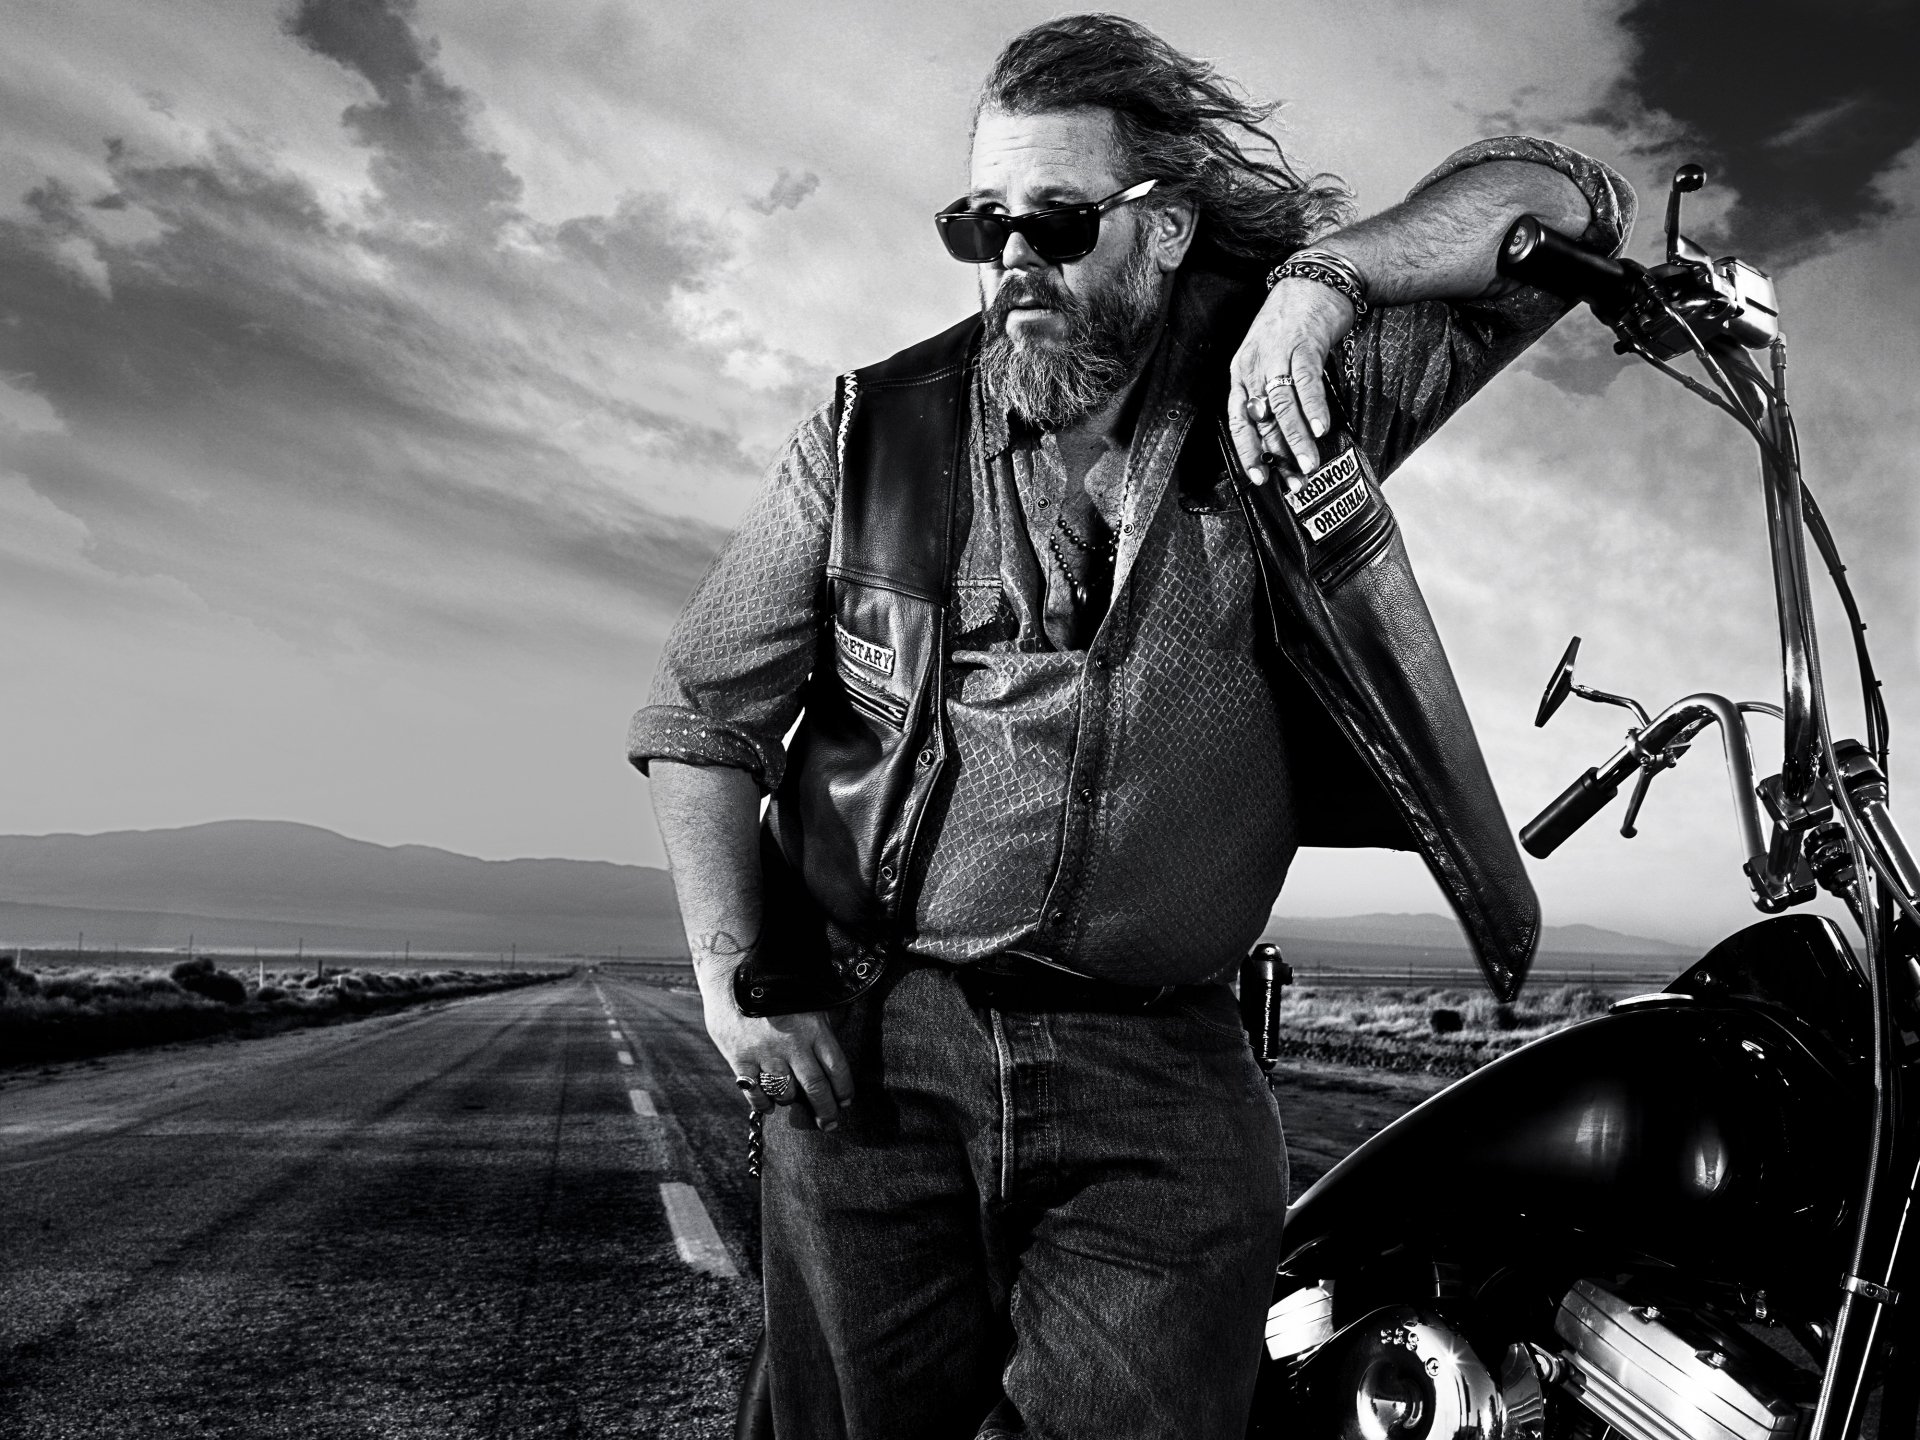 Sons Of Anarchy 4k Ultra HD Wallpaper | Background Image | 4000x3000